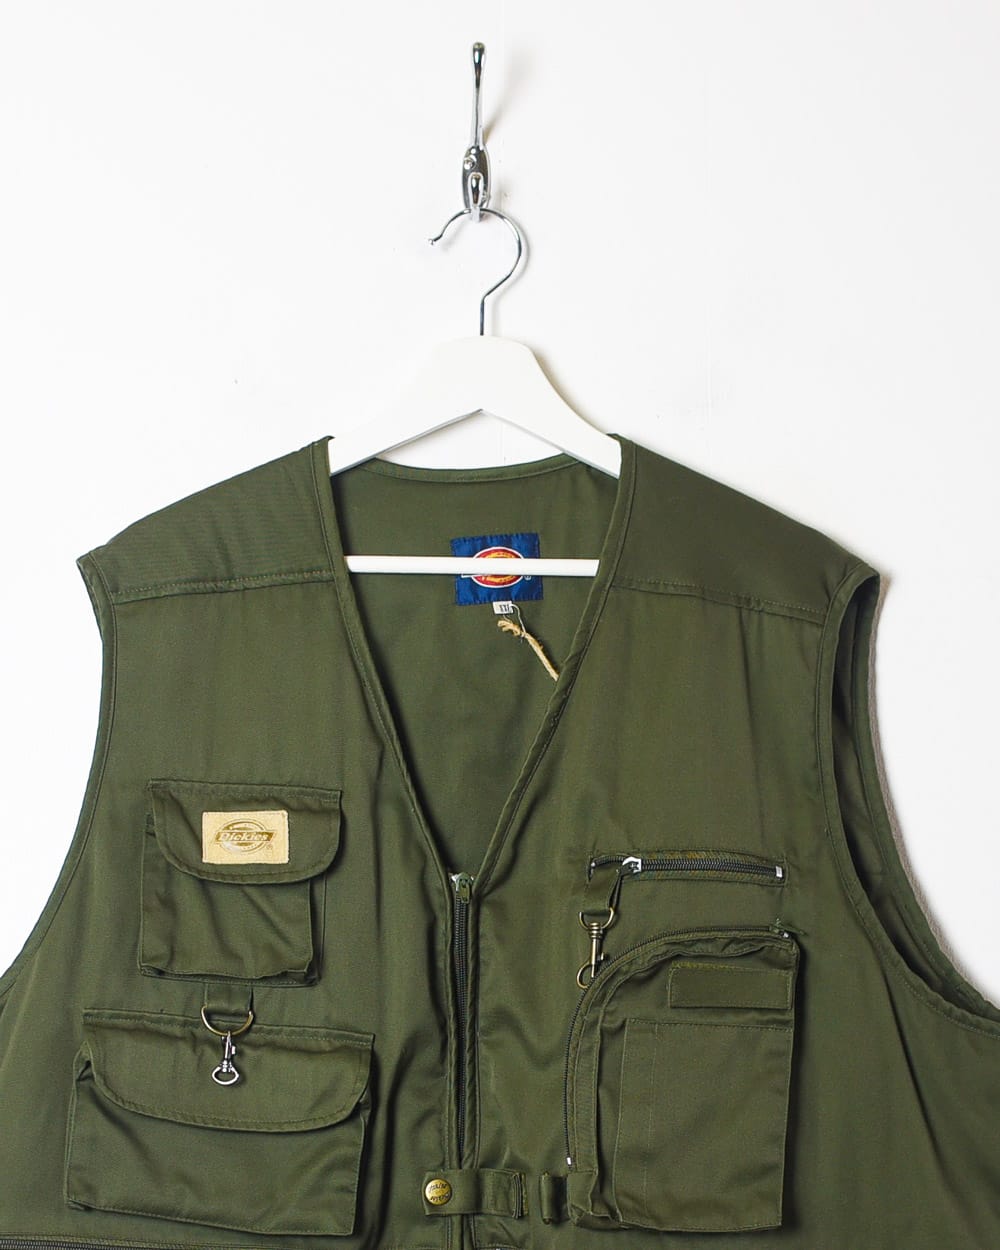 Green Dickies Utility Vest - XX-Large